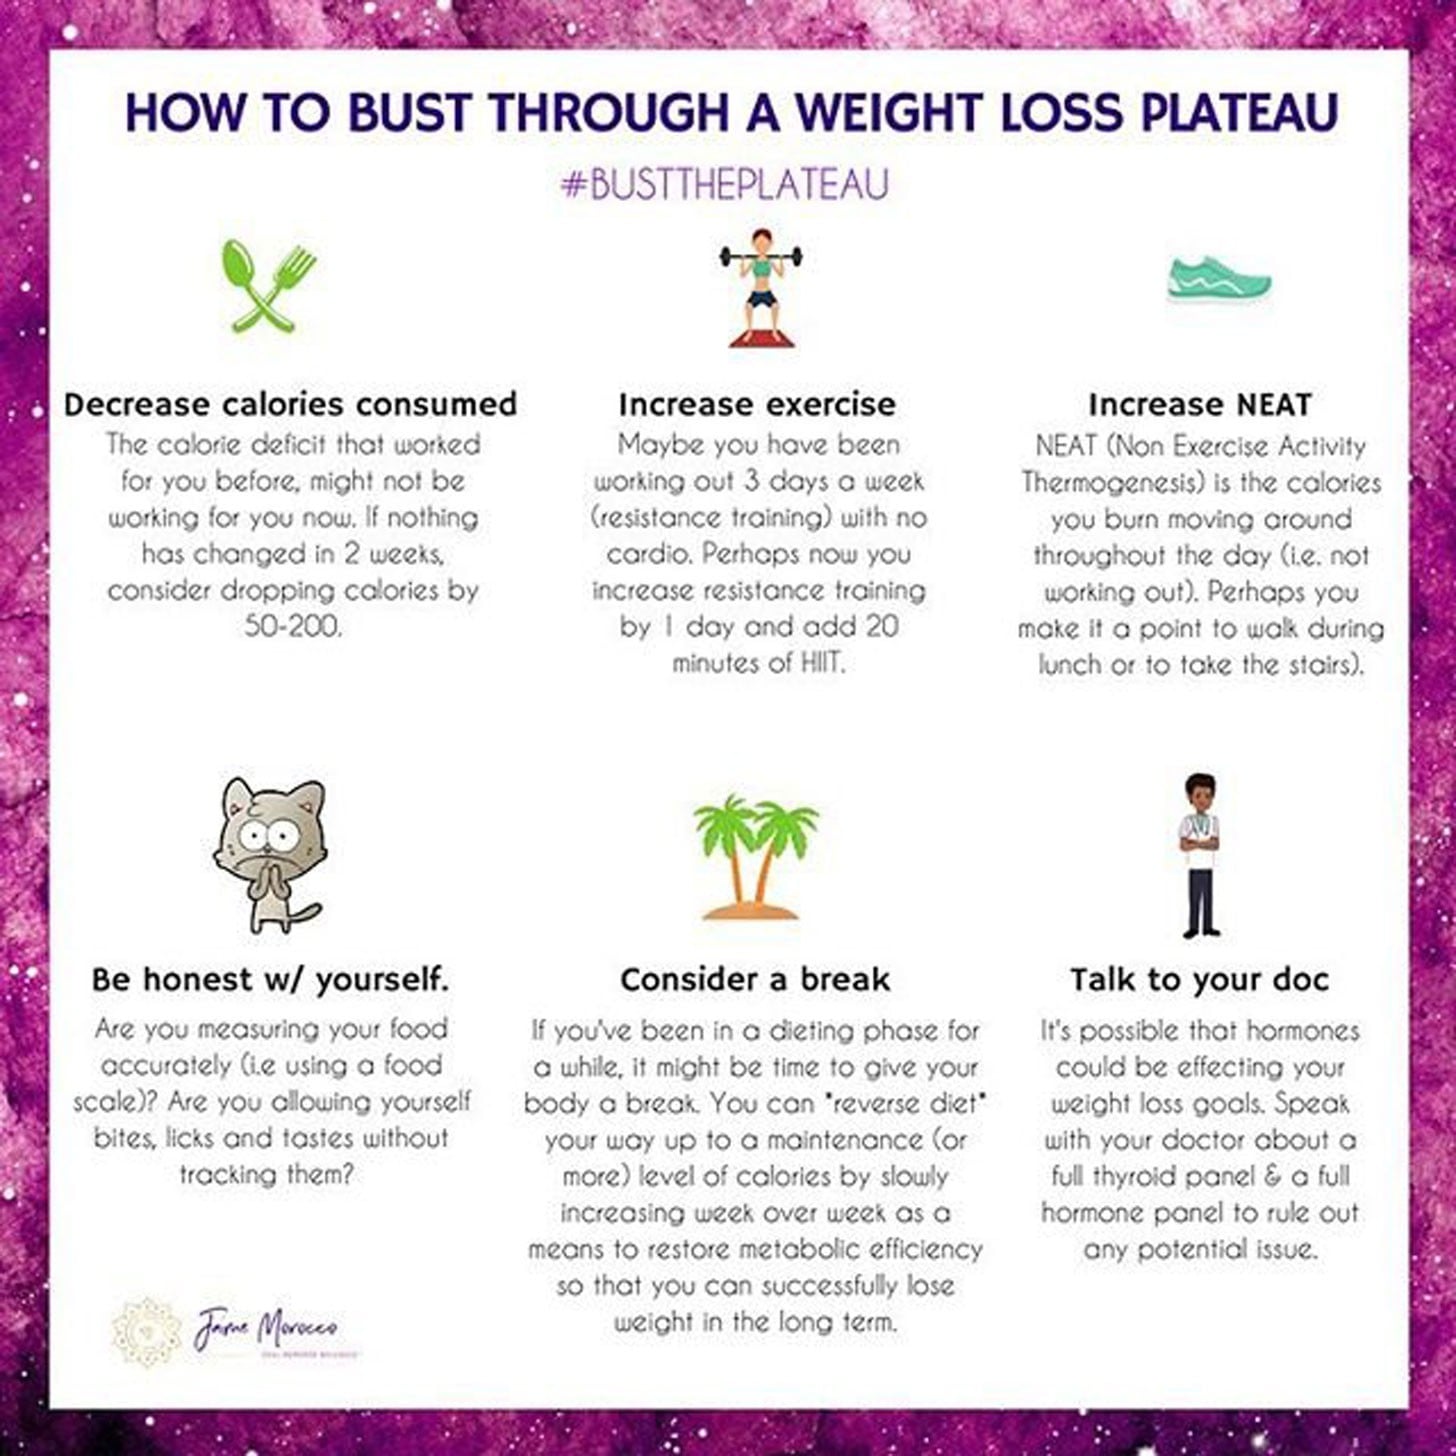 Weight Loss Plateaus Are Real: Here's How to Break Them